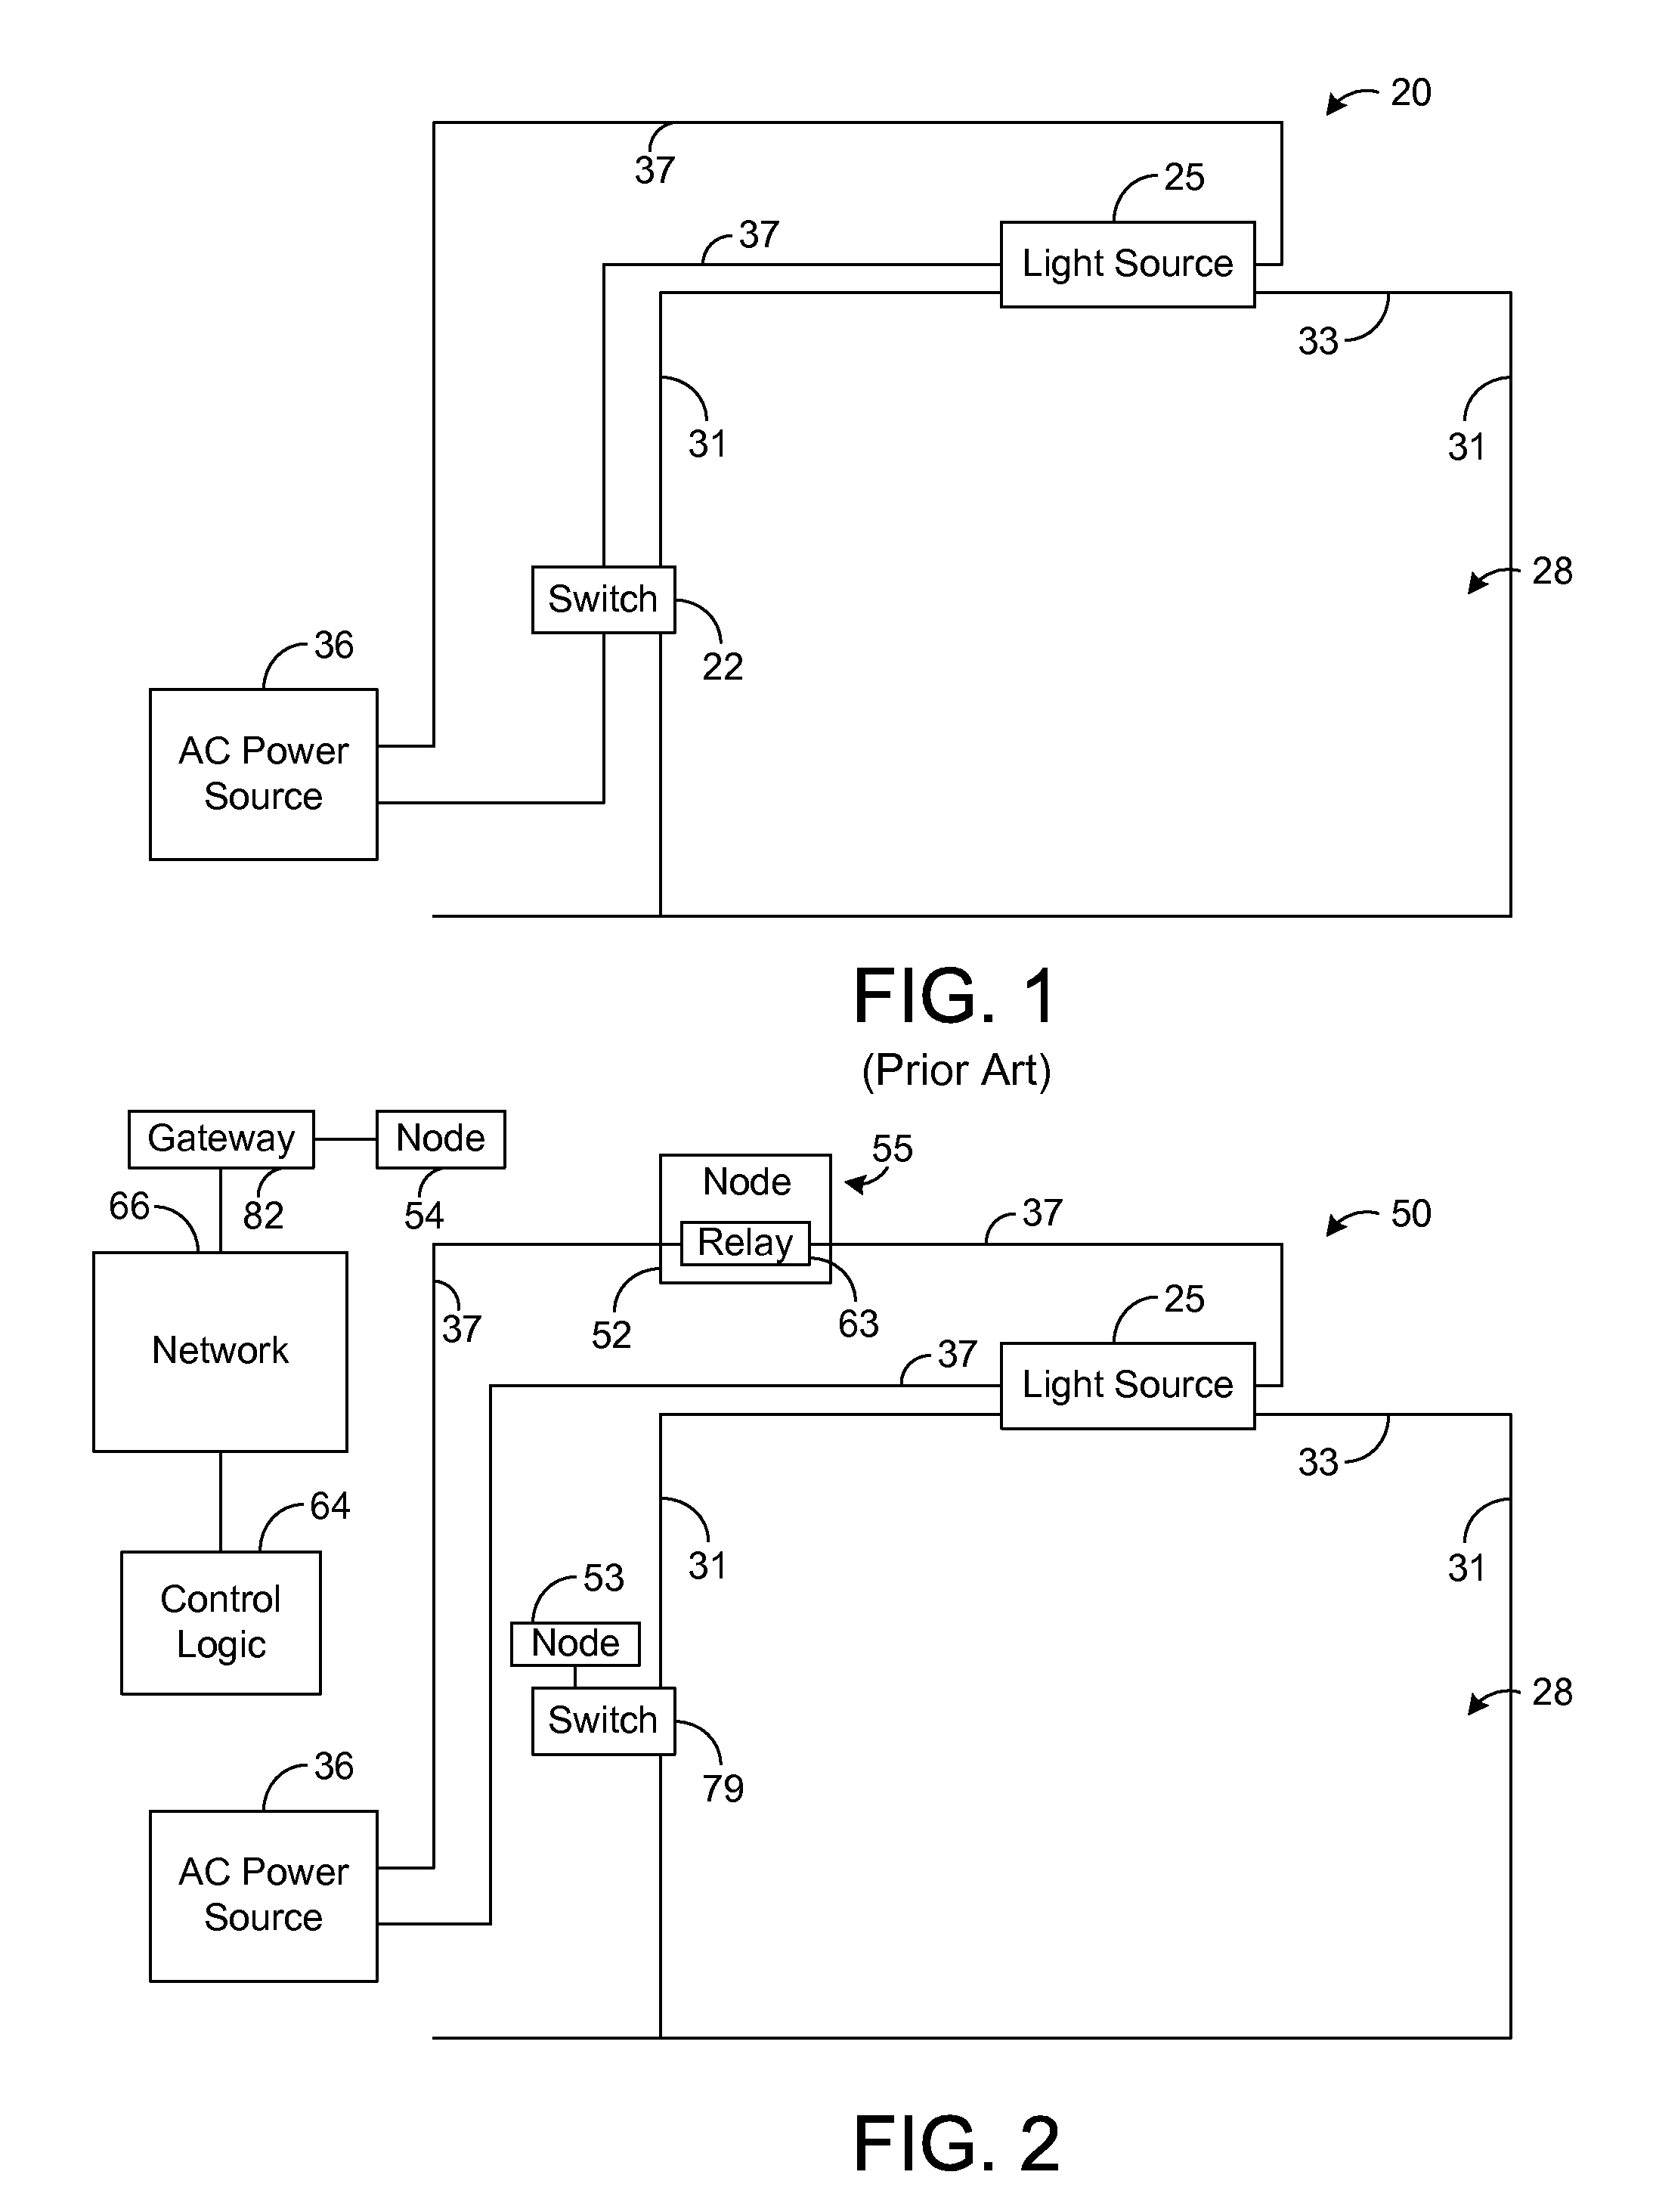 Lighting control systems and methods